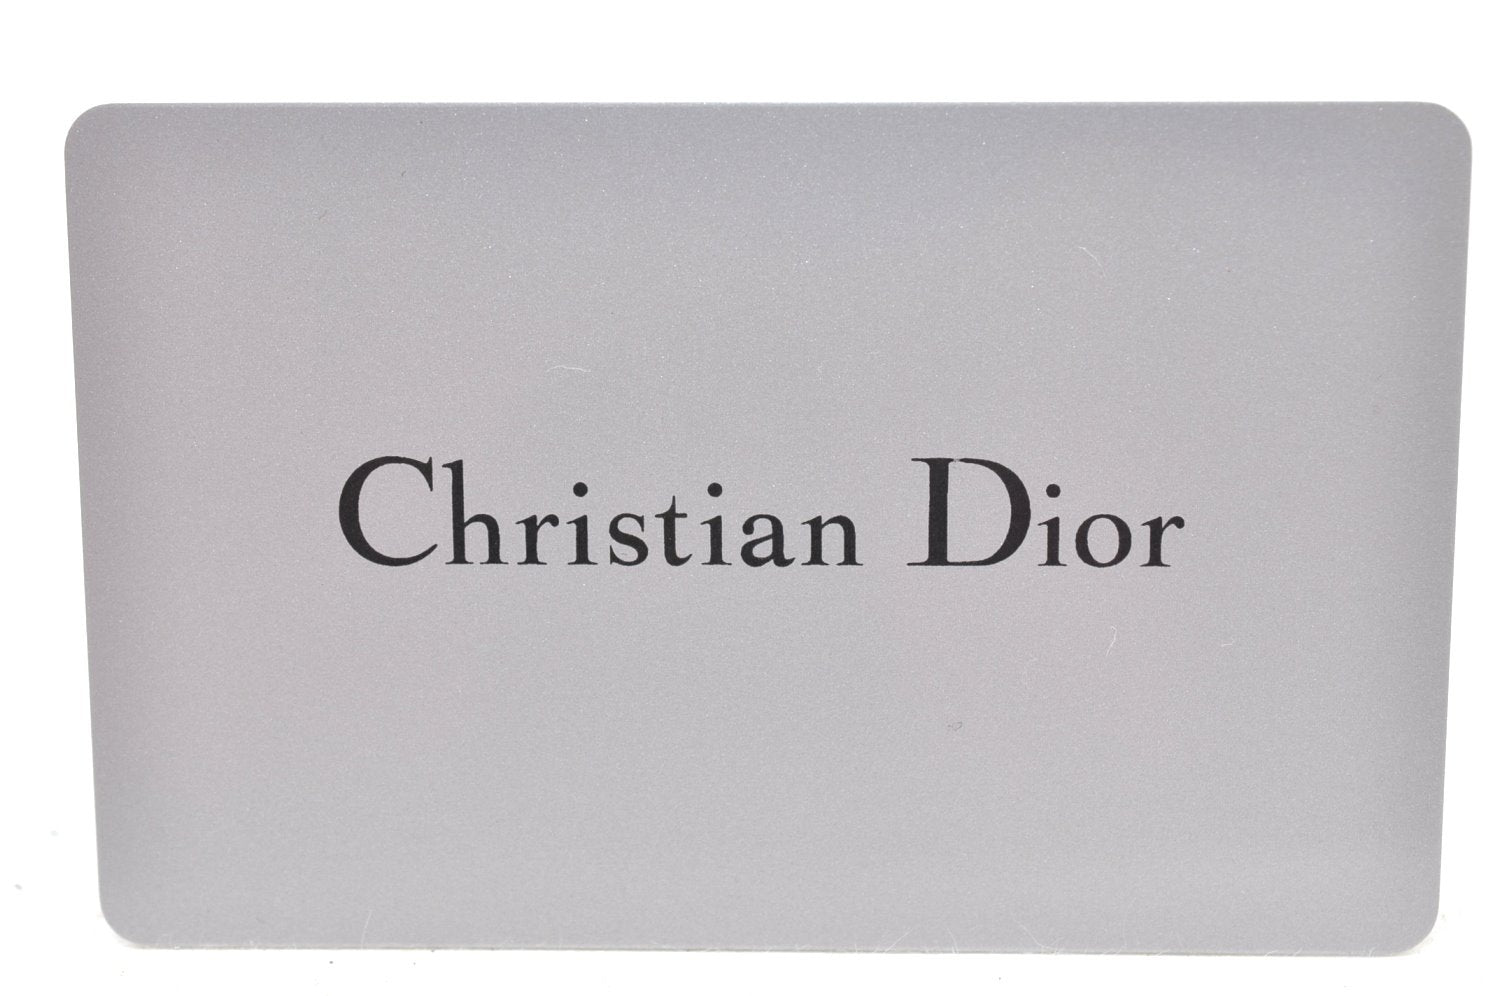 Authentic Christian Dior Lady Dior Lamb Skin Cannage 2Way Hand Bag White K9149